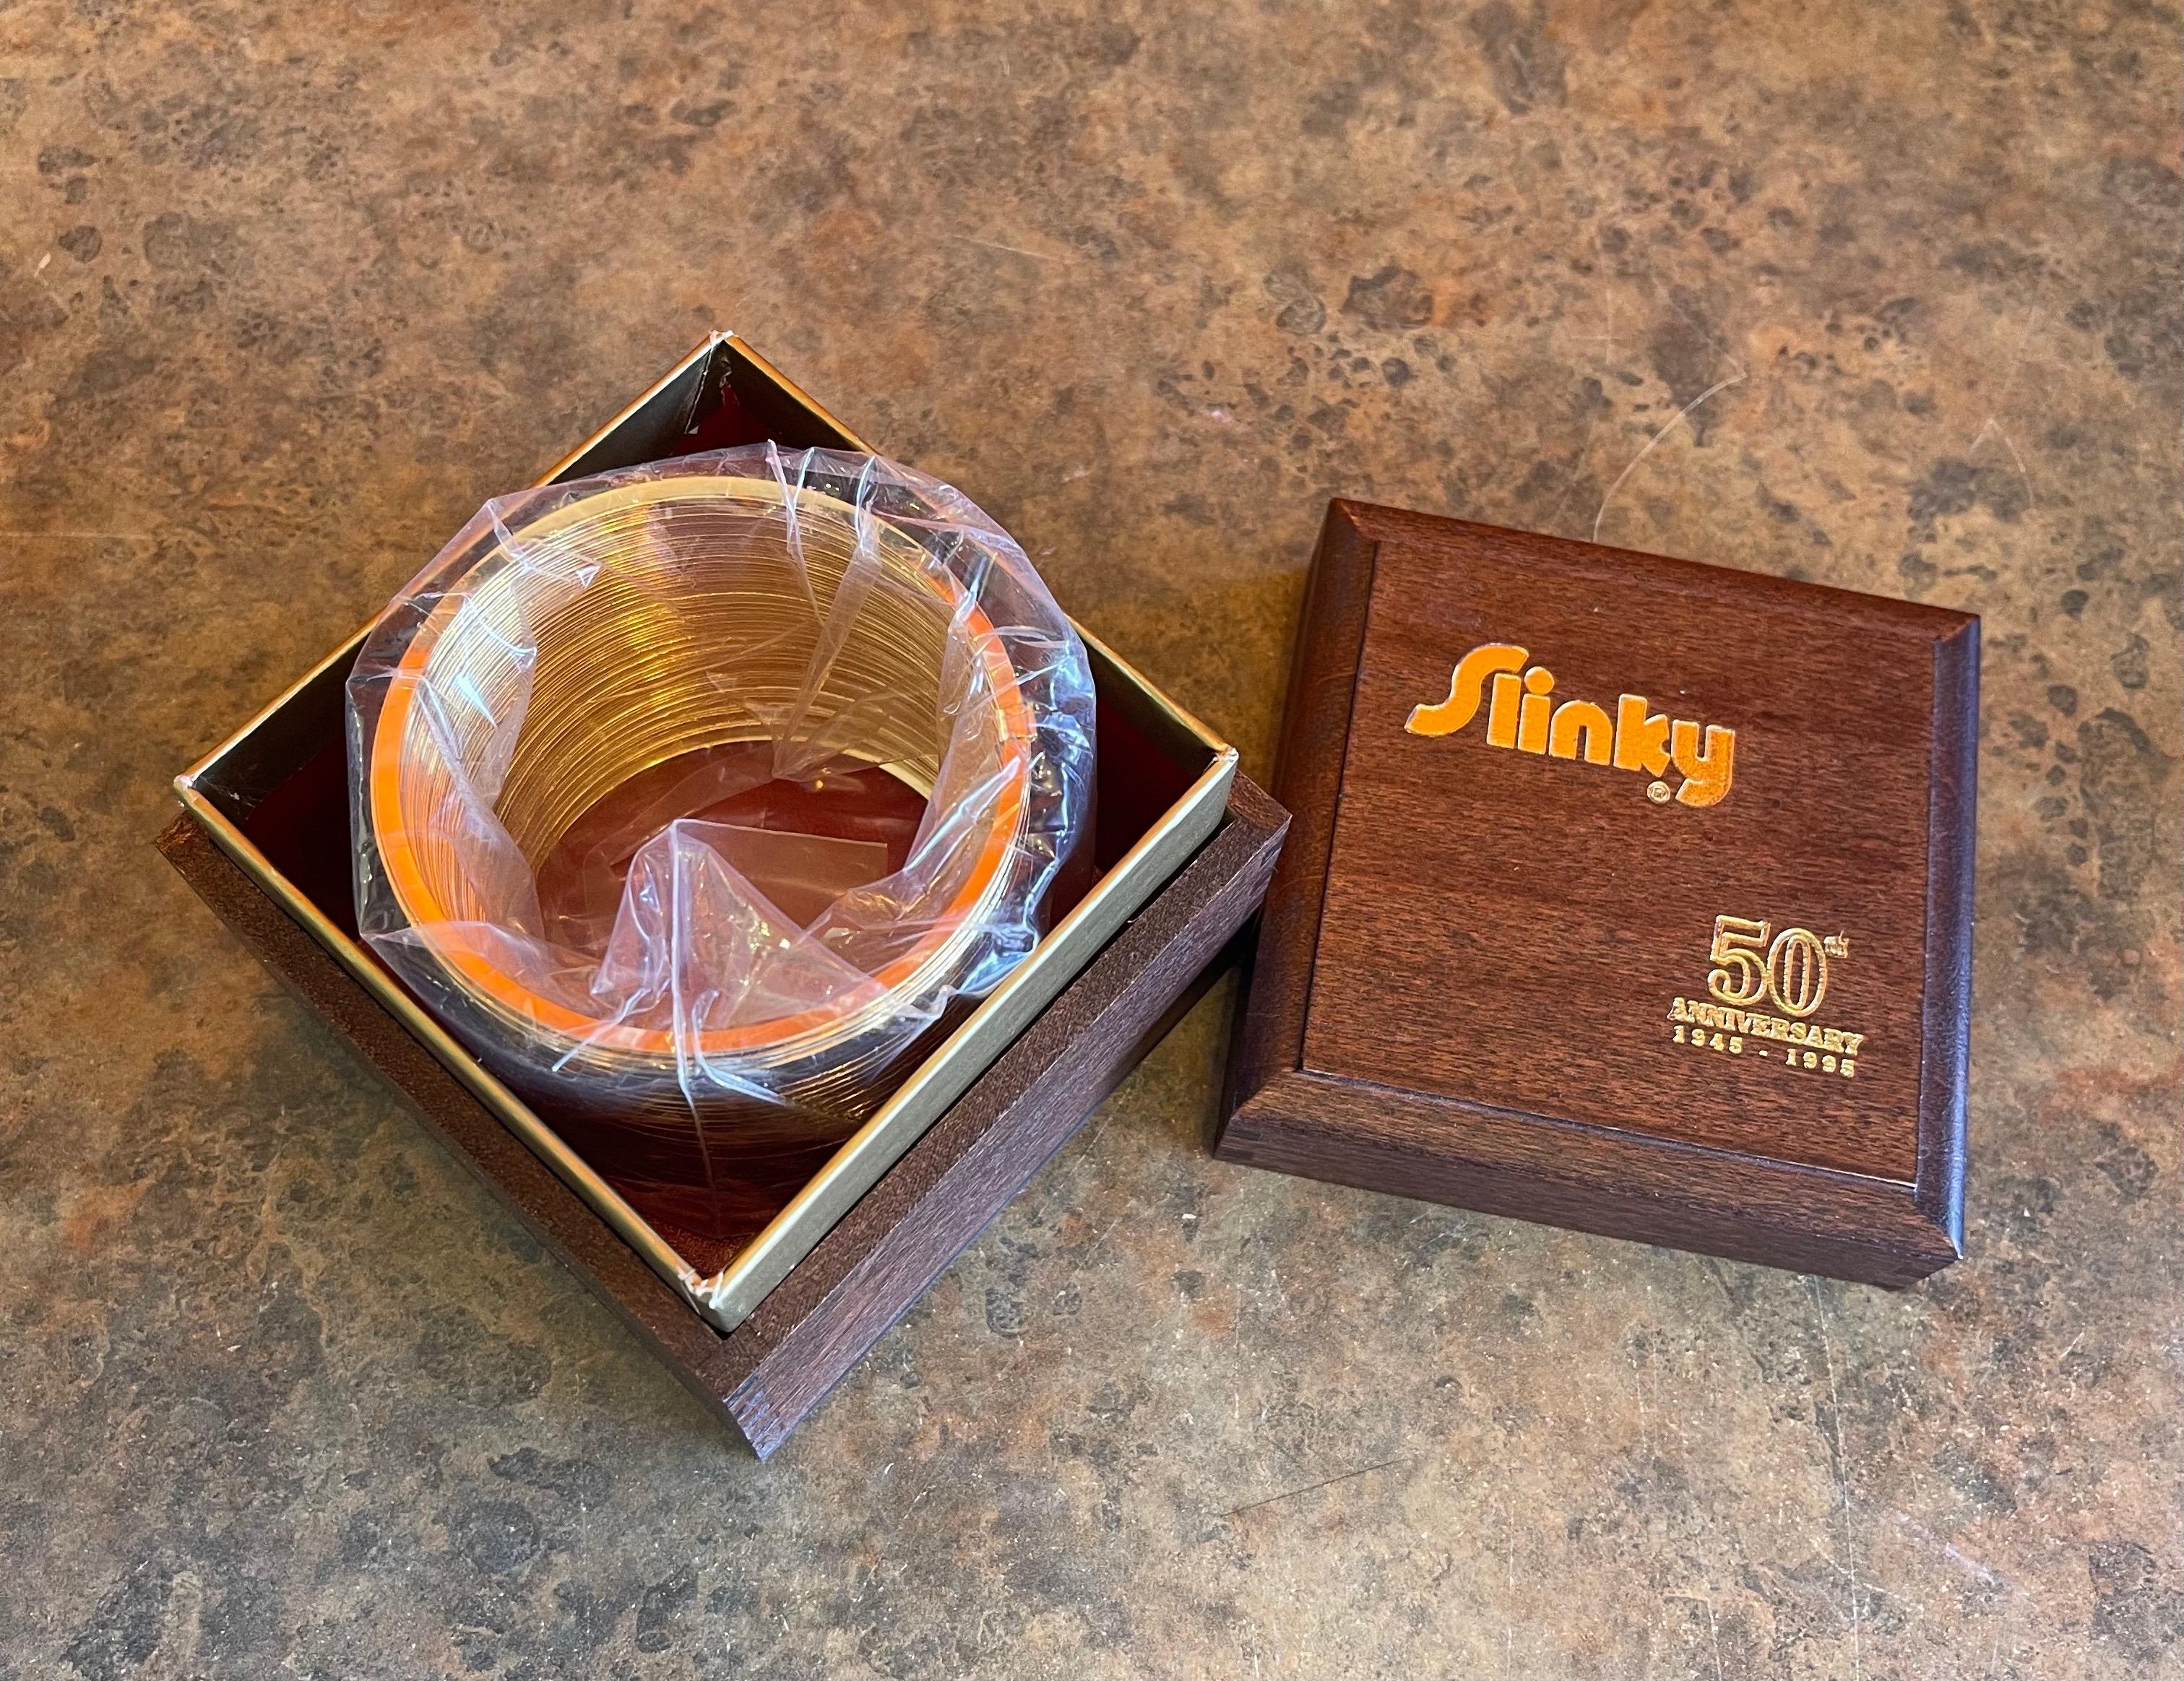 50th Anniversary Gold-Plated Slinky Toy in Wood Box, New Condition 1